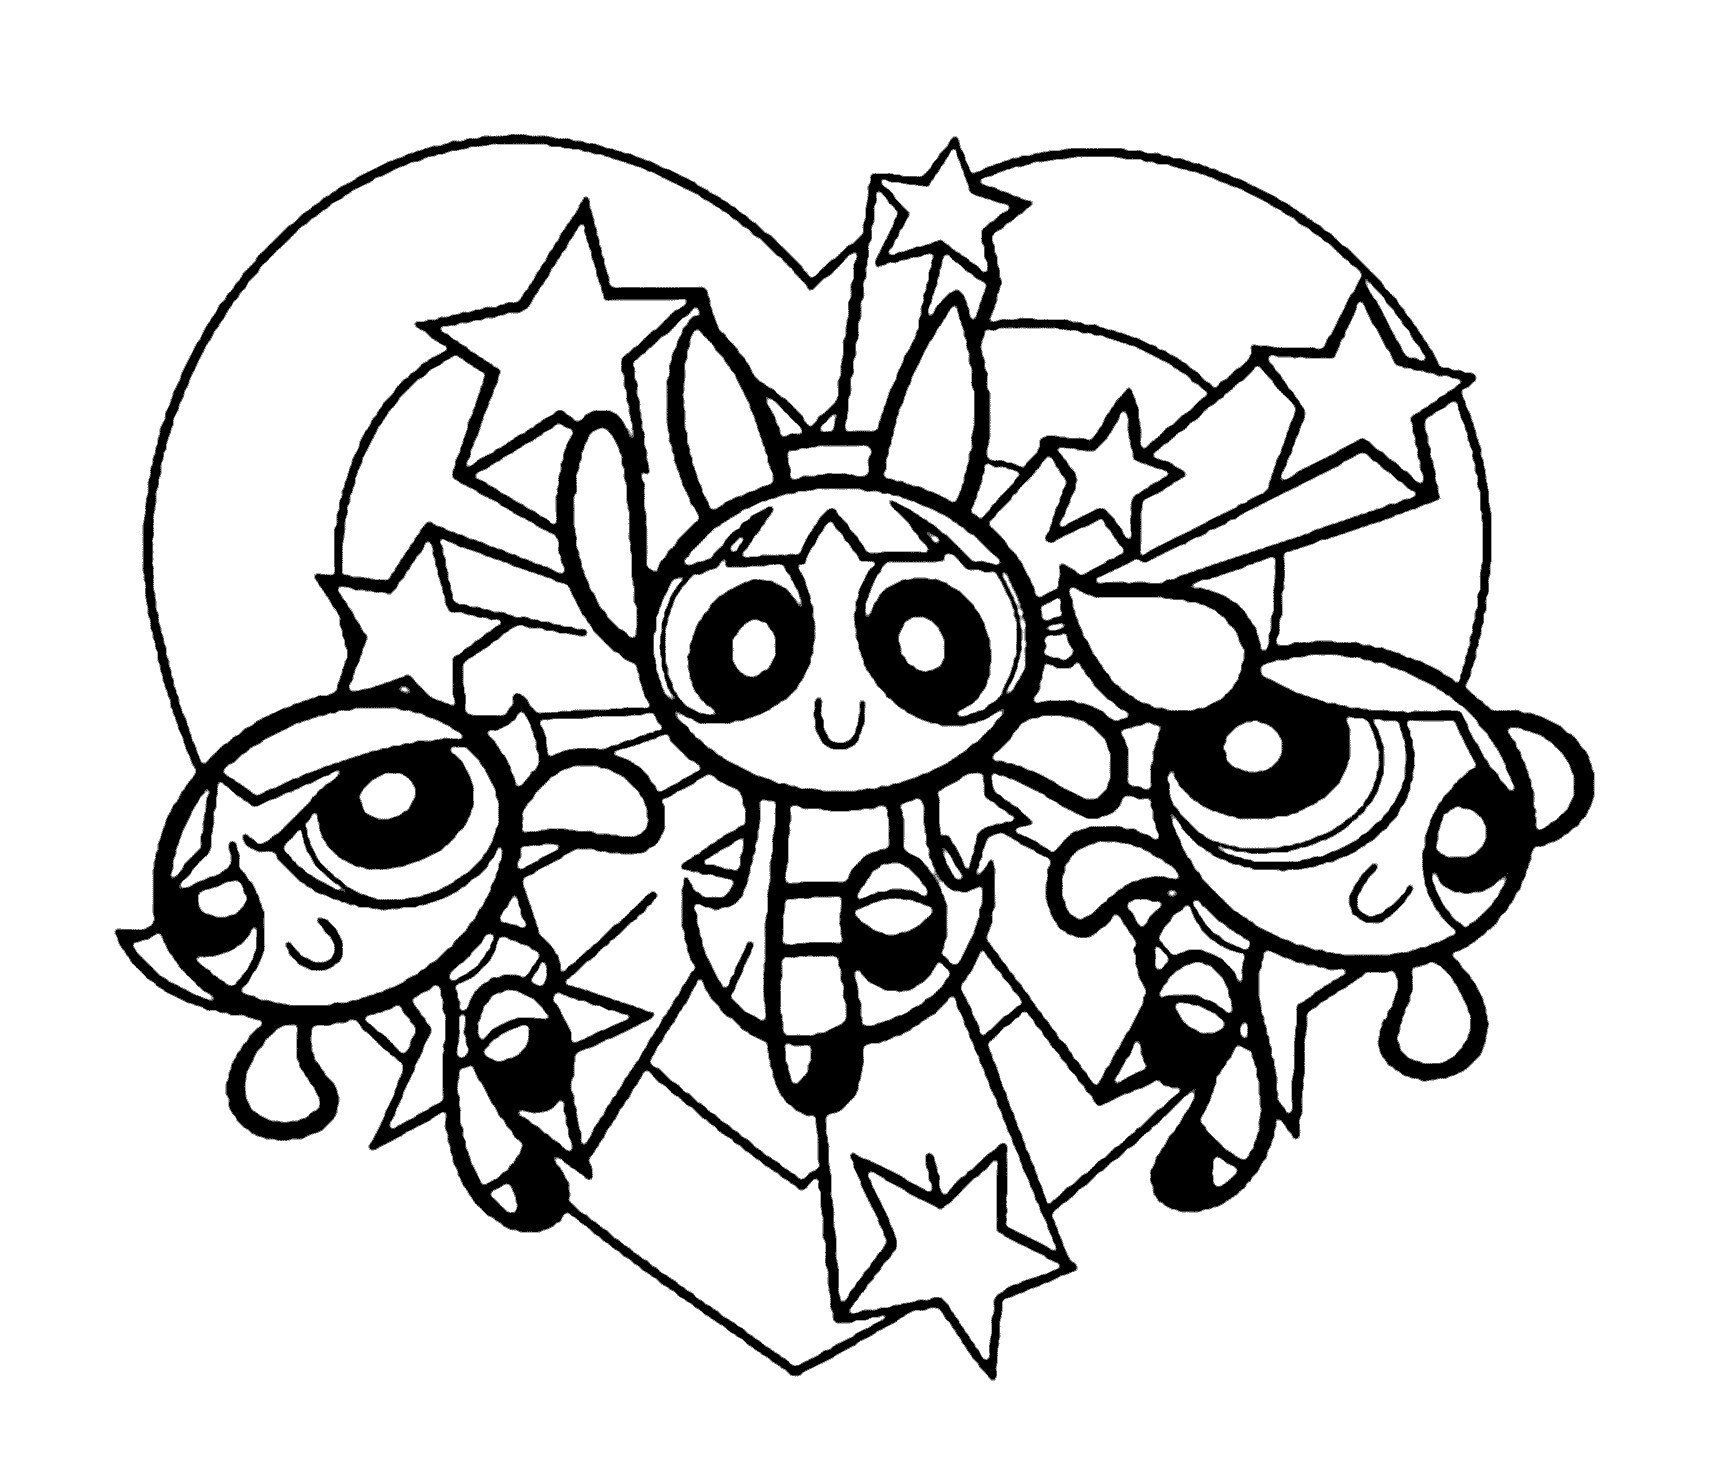 Powerpuff Girls Coloring Pages
 12 printable pictures of powerpuff girls page Print